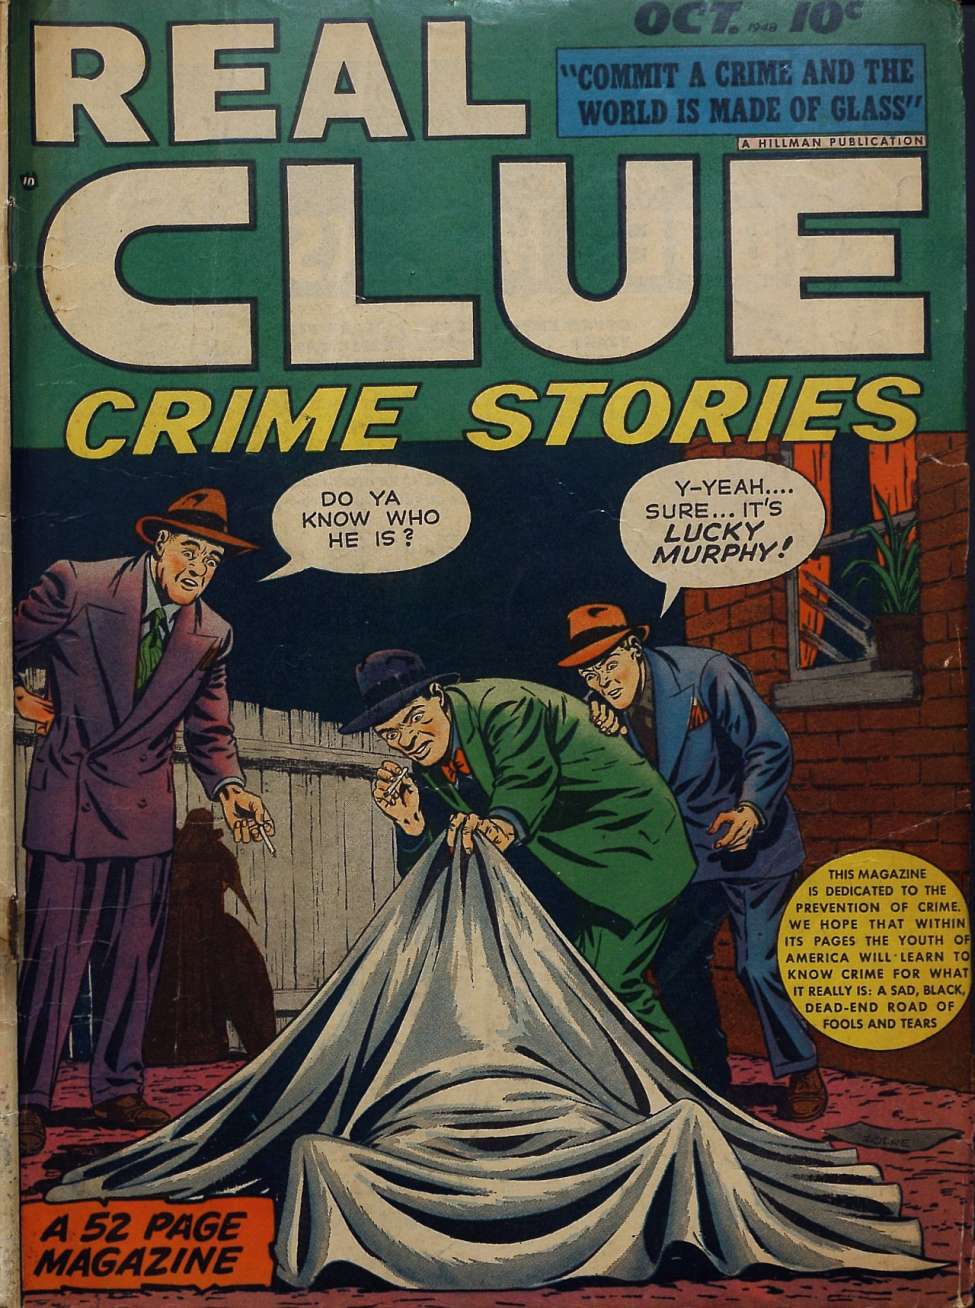 Book Cover For Real Clue Crime Stories v3 8